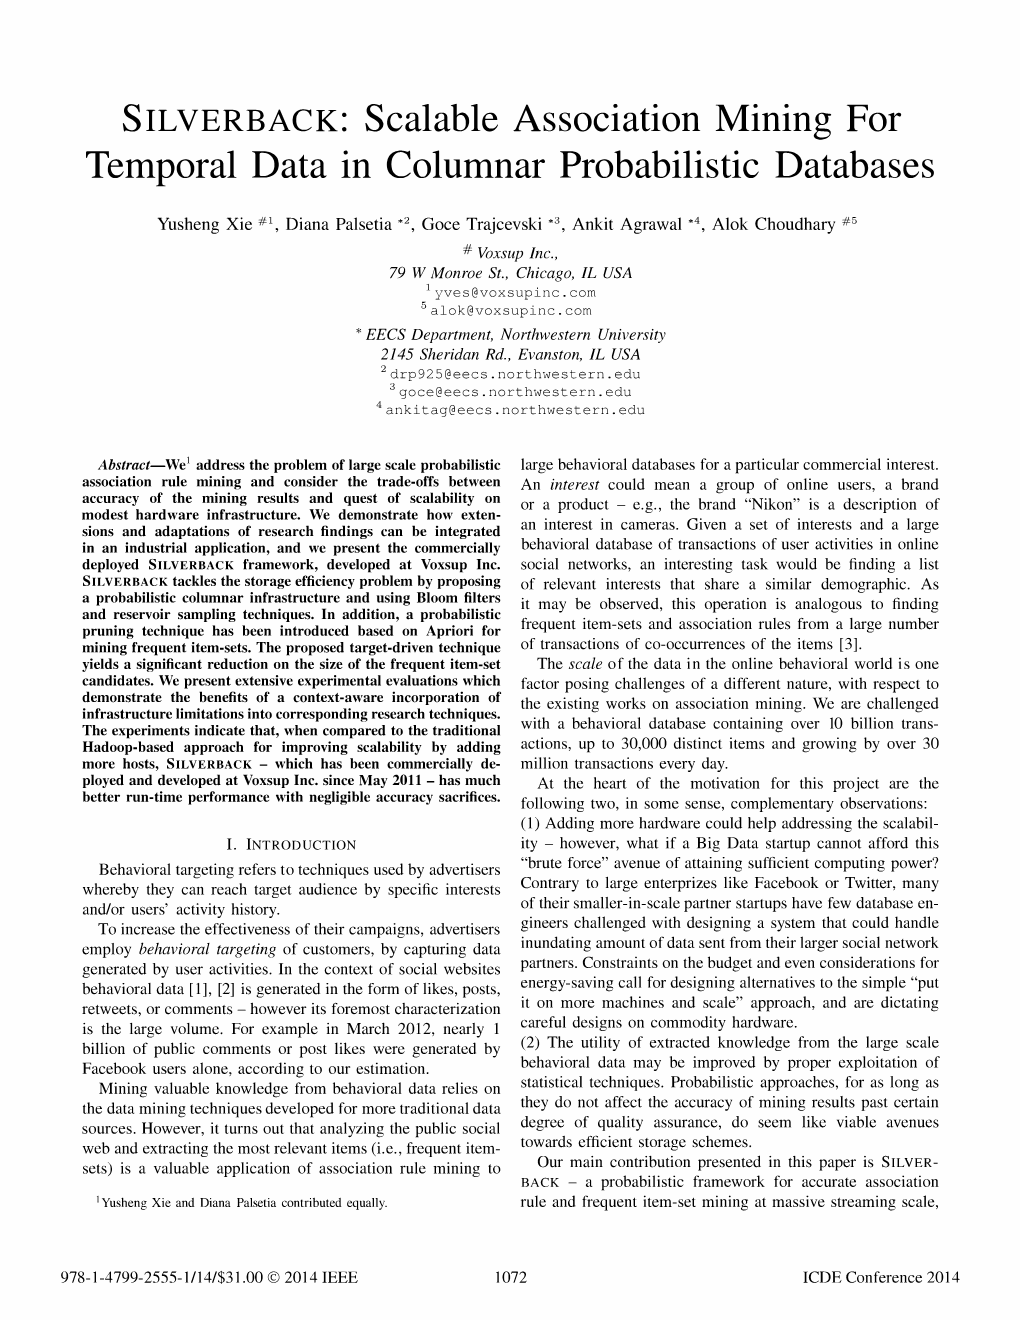 SILVERBACK: Scalable Association Mining for Temporal Data in Columnar Probabilistic Databases